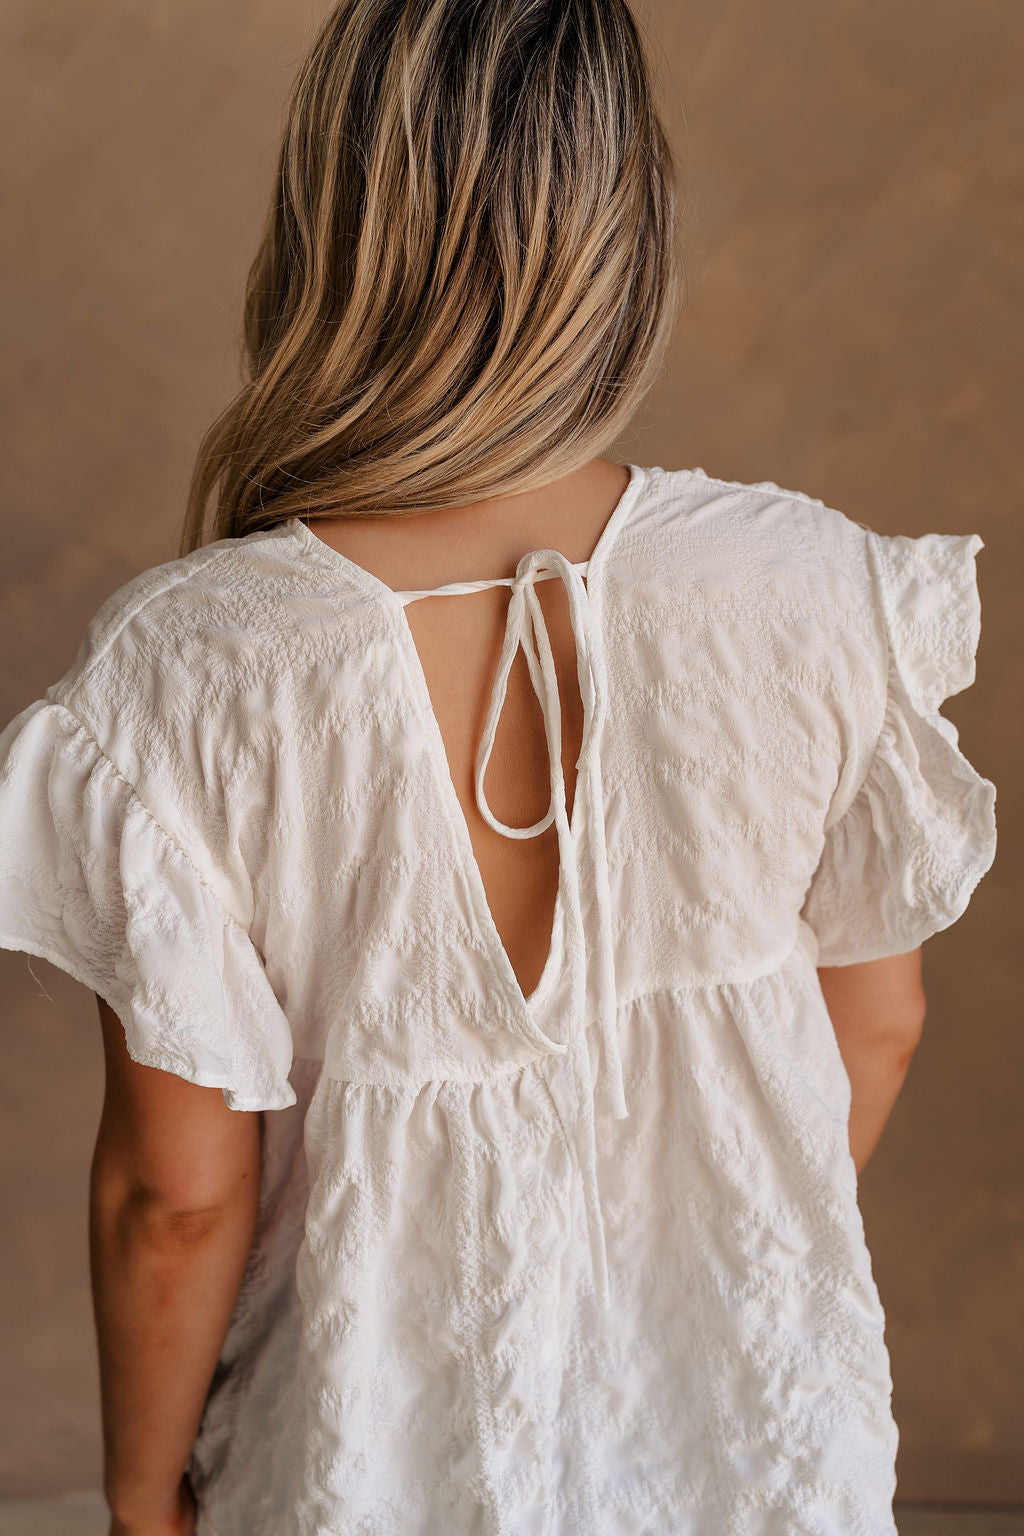 Upper body back view of female model wearing the Vivienne White Textured Top that has white textured fabric, short ruffled sleeves, and v neckline. worn with jeans.